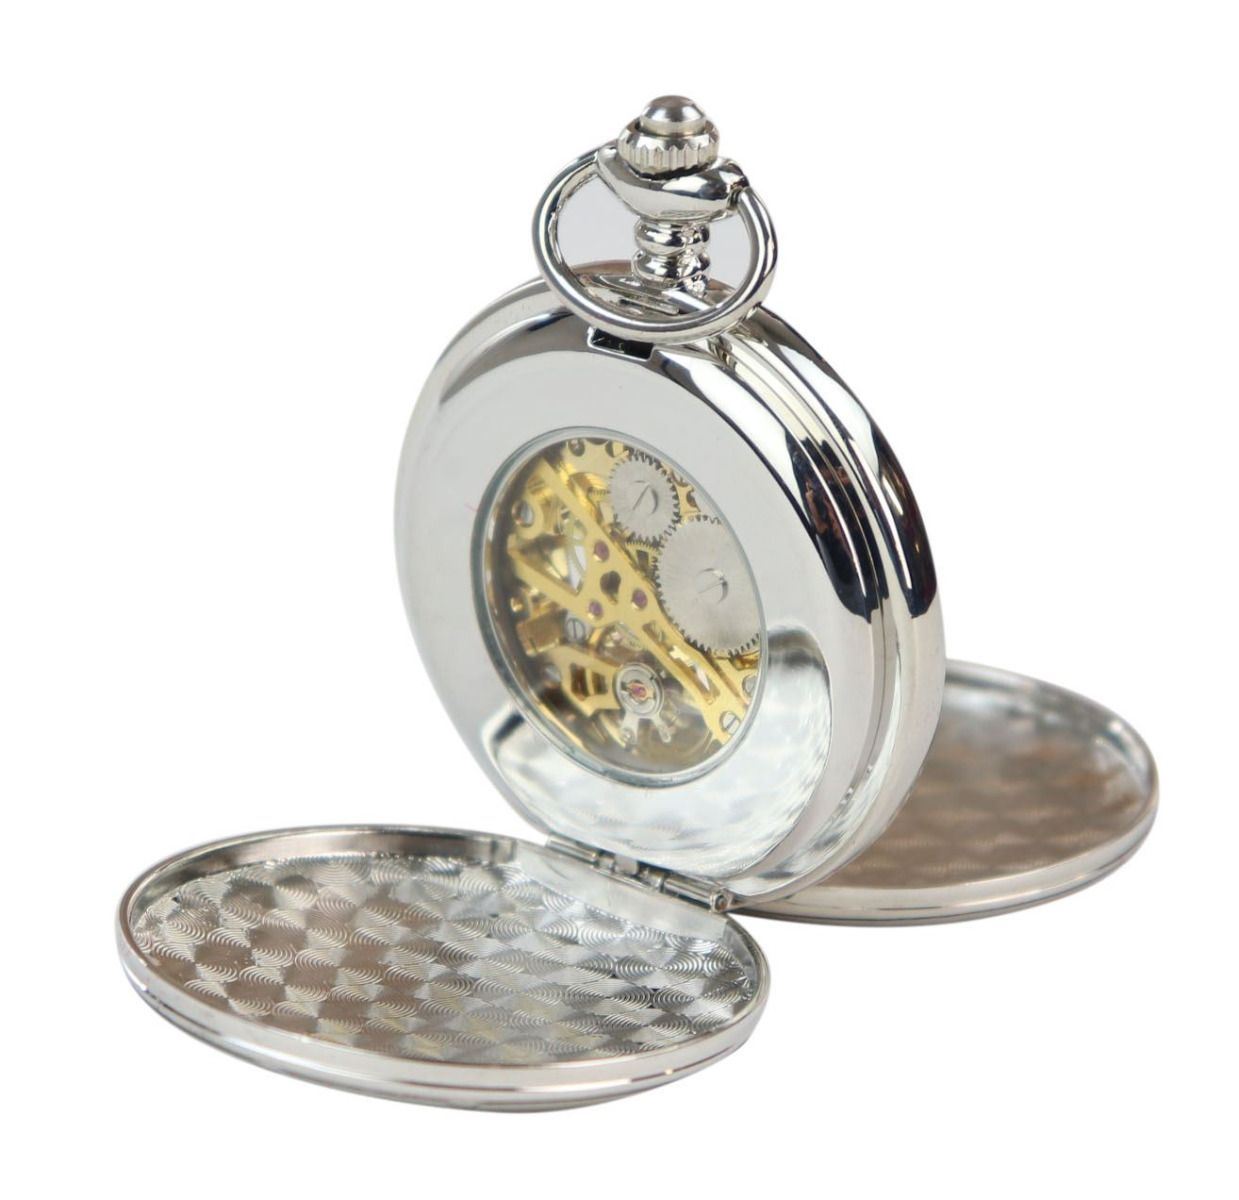 Classic Mechanical Pocket Watch Peaky Blinders Vintage Skeleton Automatic - Upperclass Fashions 